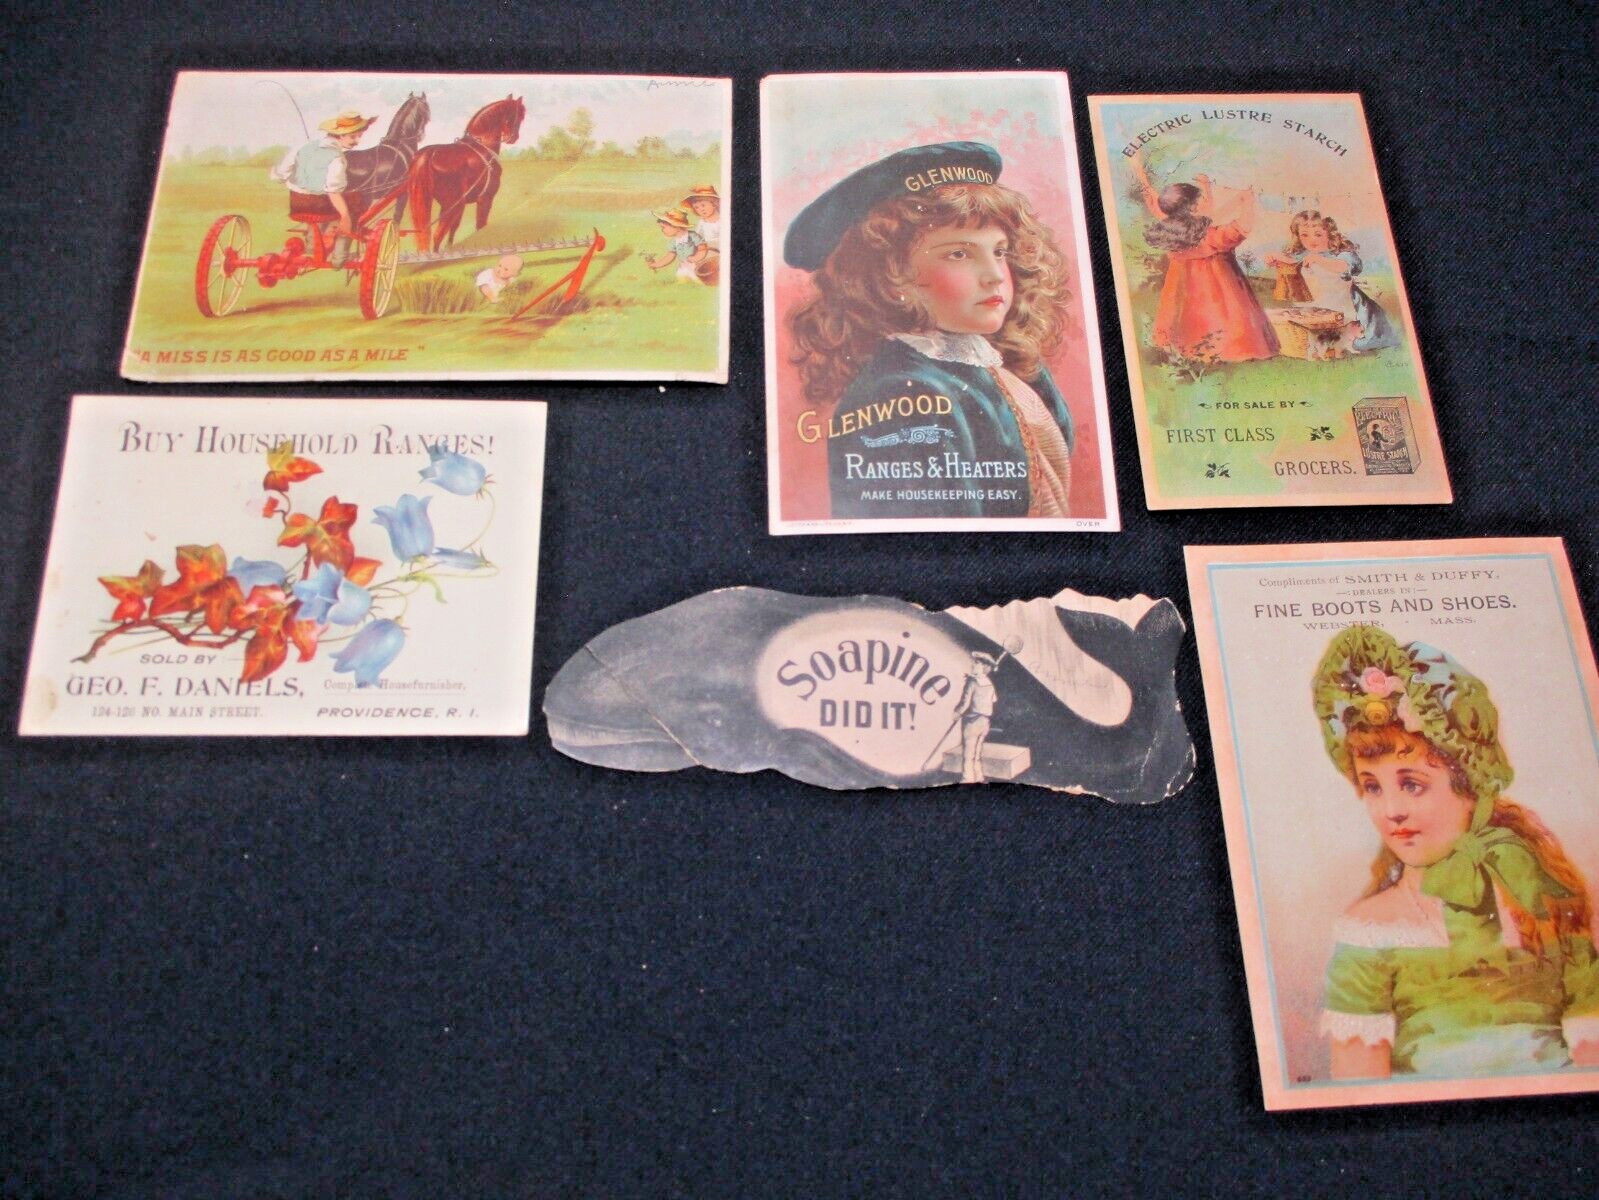 Early Lot of Antique Trade Cards Soapine Whale, Glenwood, Starch, Ranges, etc